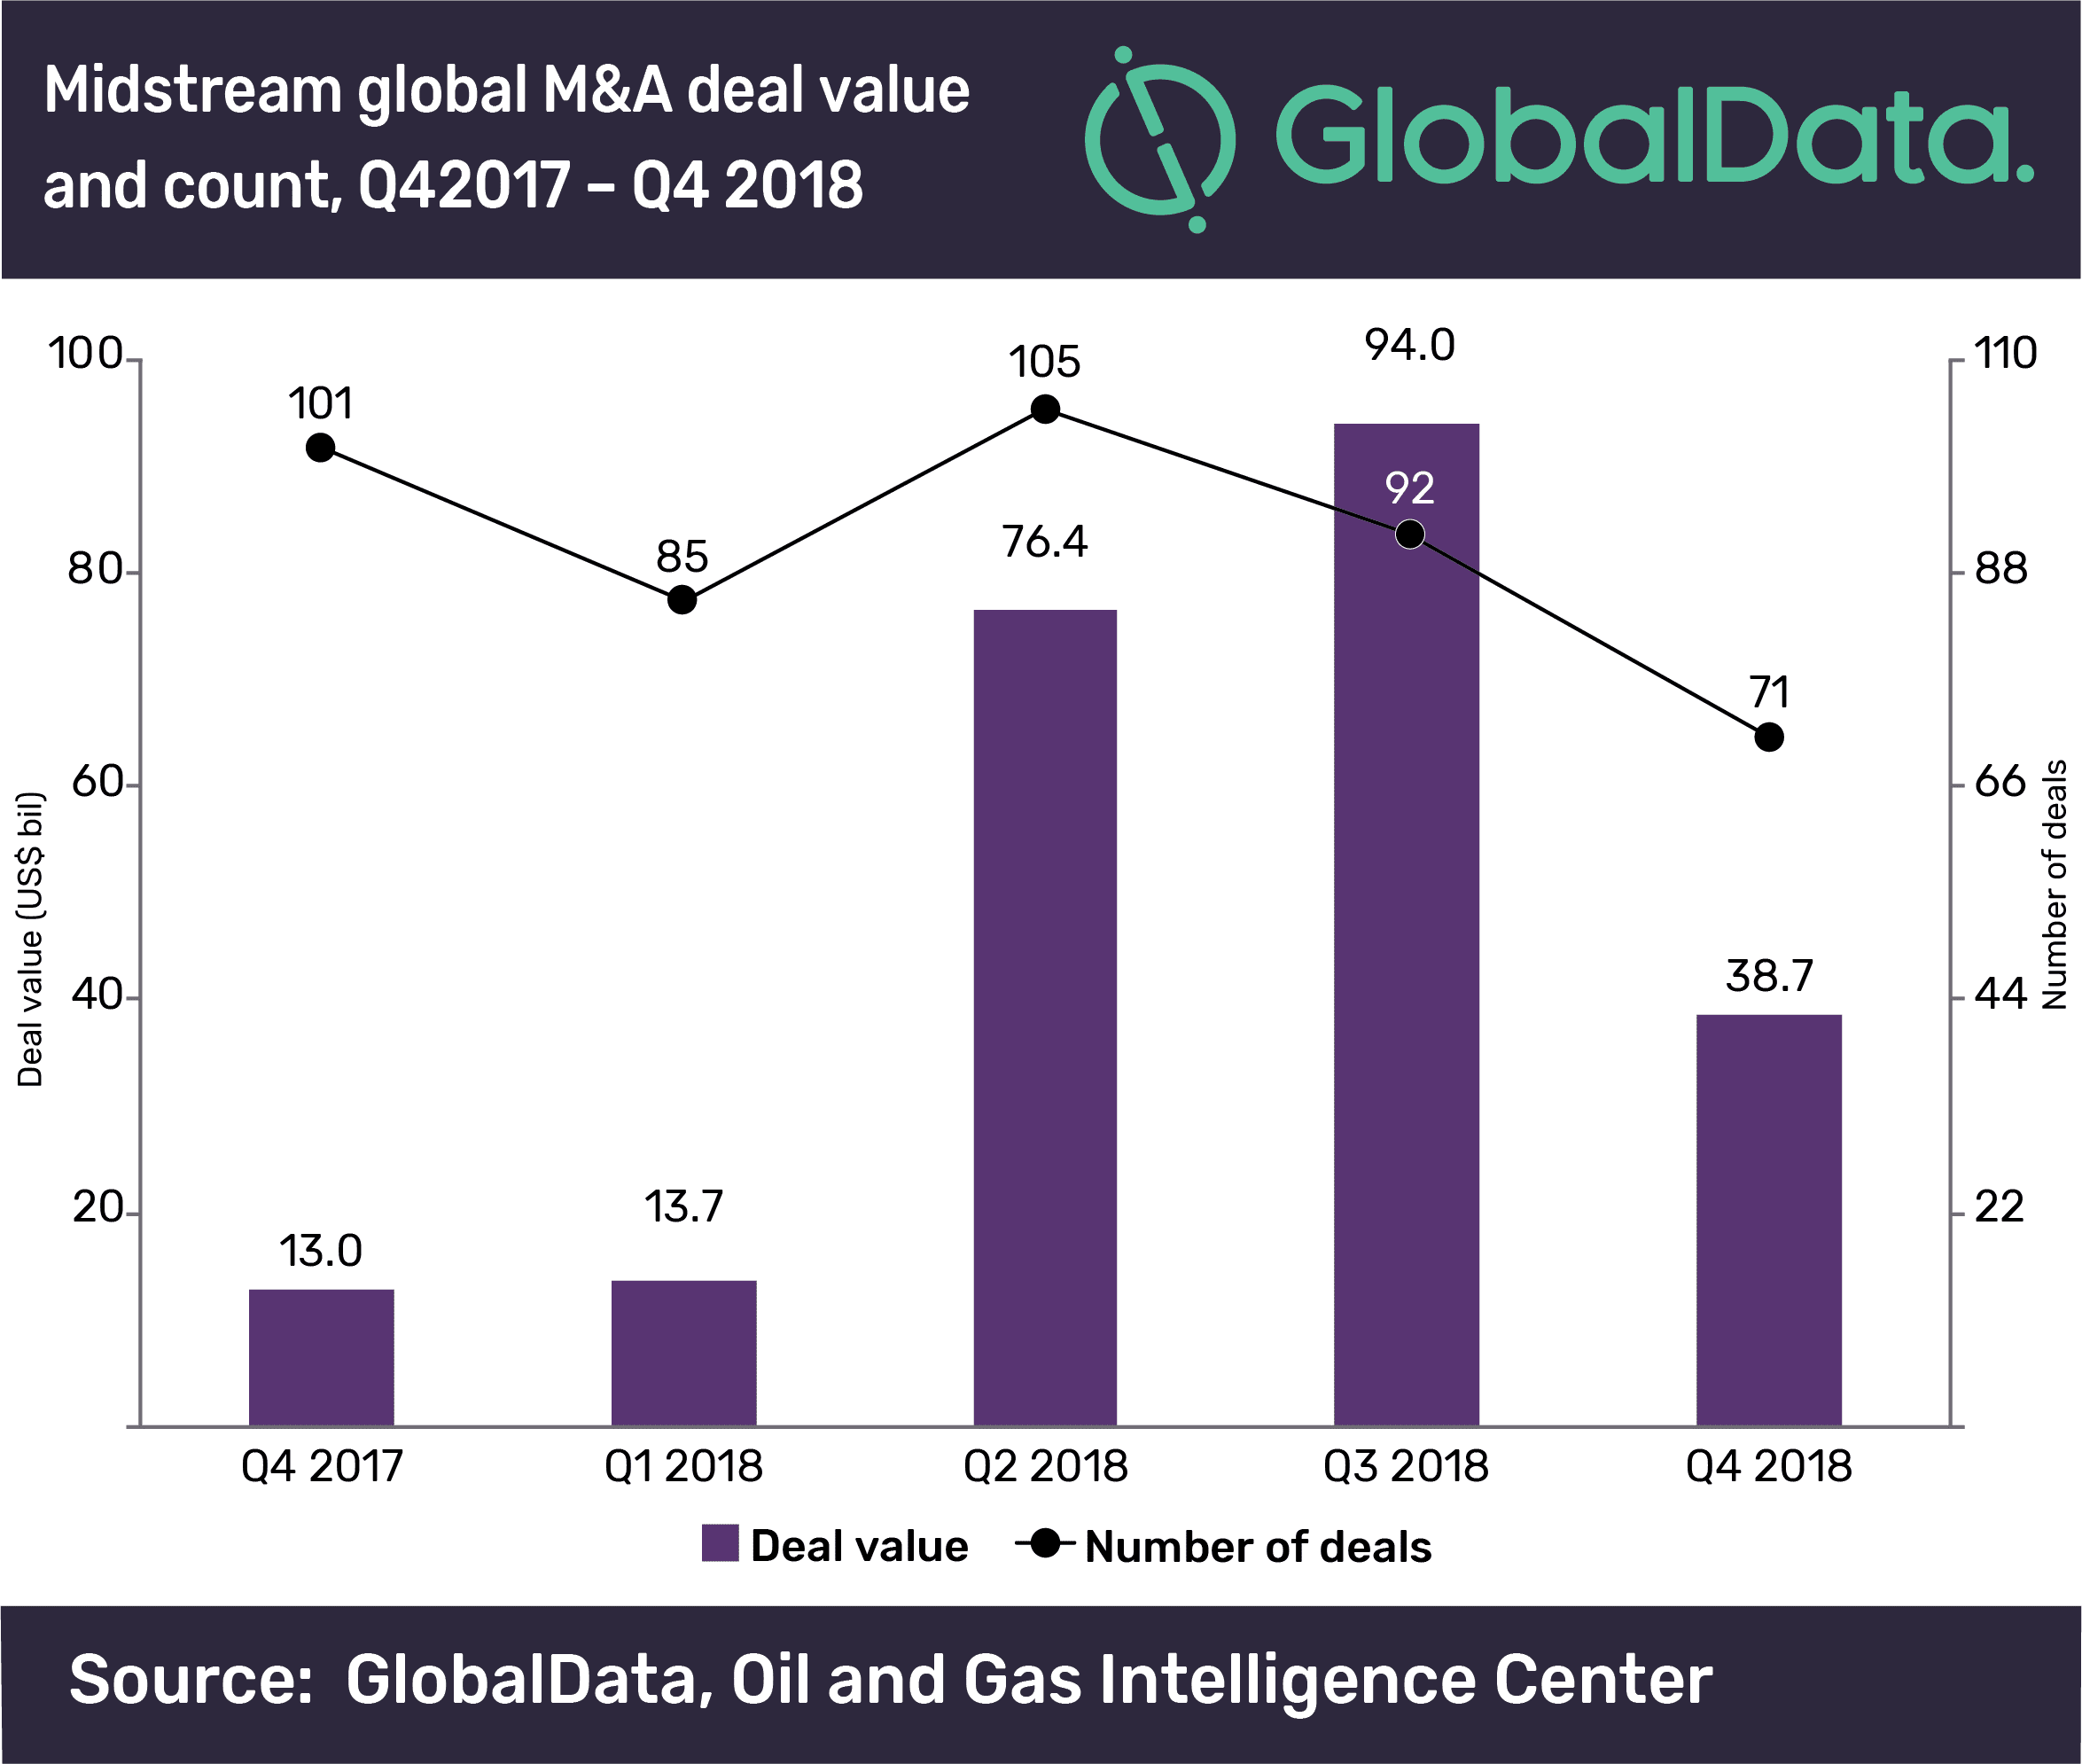 Midstream oil and gas M&A values declined 59% in Q4 2018